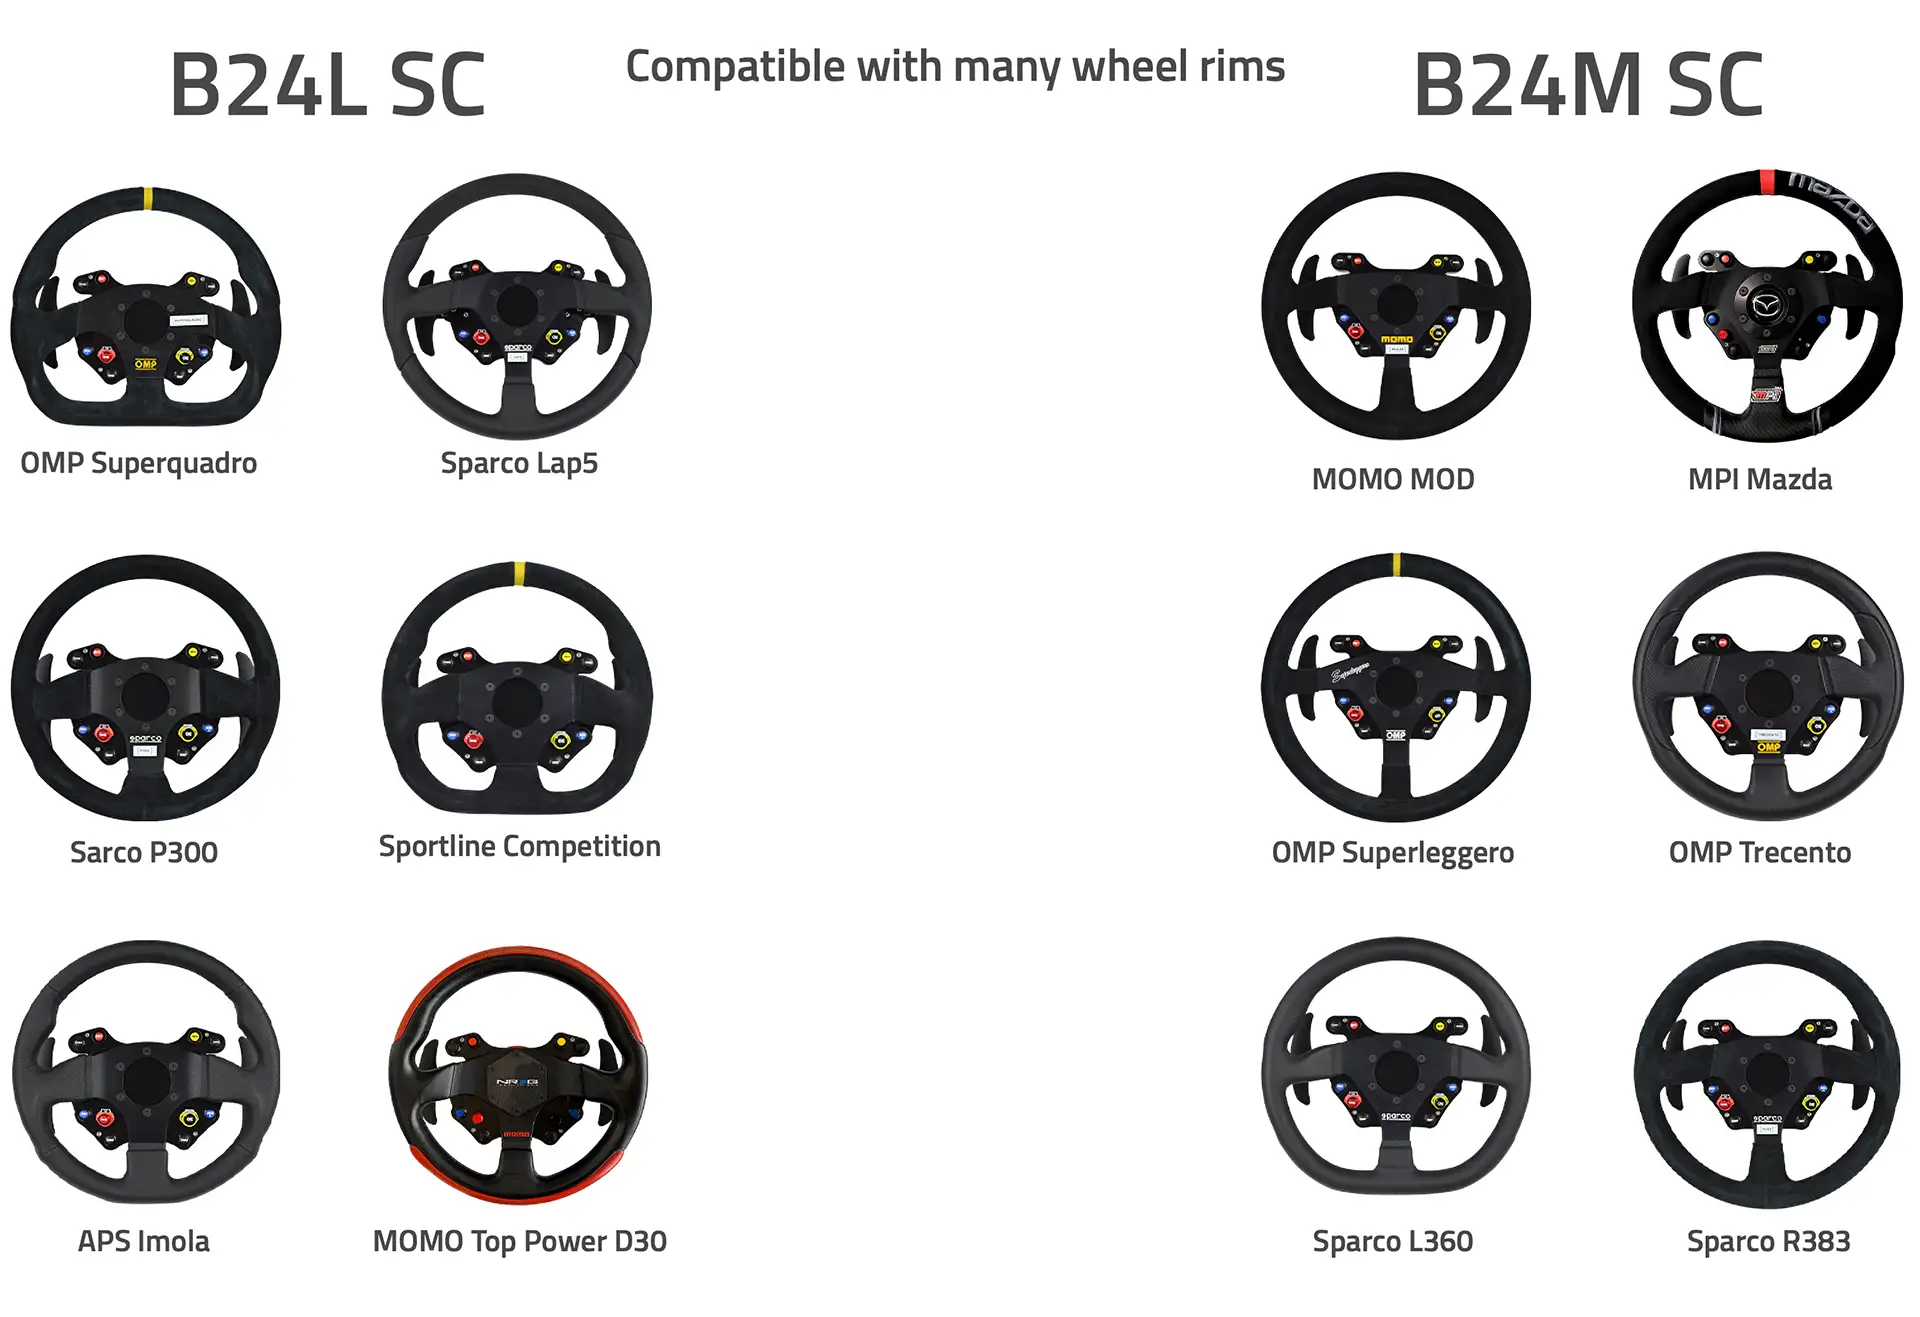 12 motorsport wheels from different manufacturers. Photographed face on against a white background. All these steering wheels are compatible with both the Ascher Racing B24L and B24M button plates for SIM racing